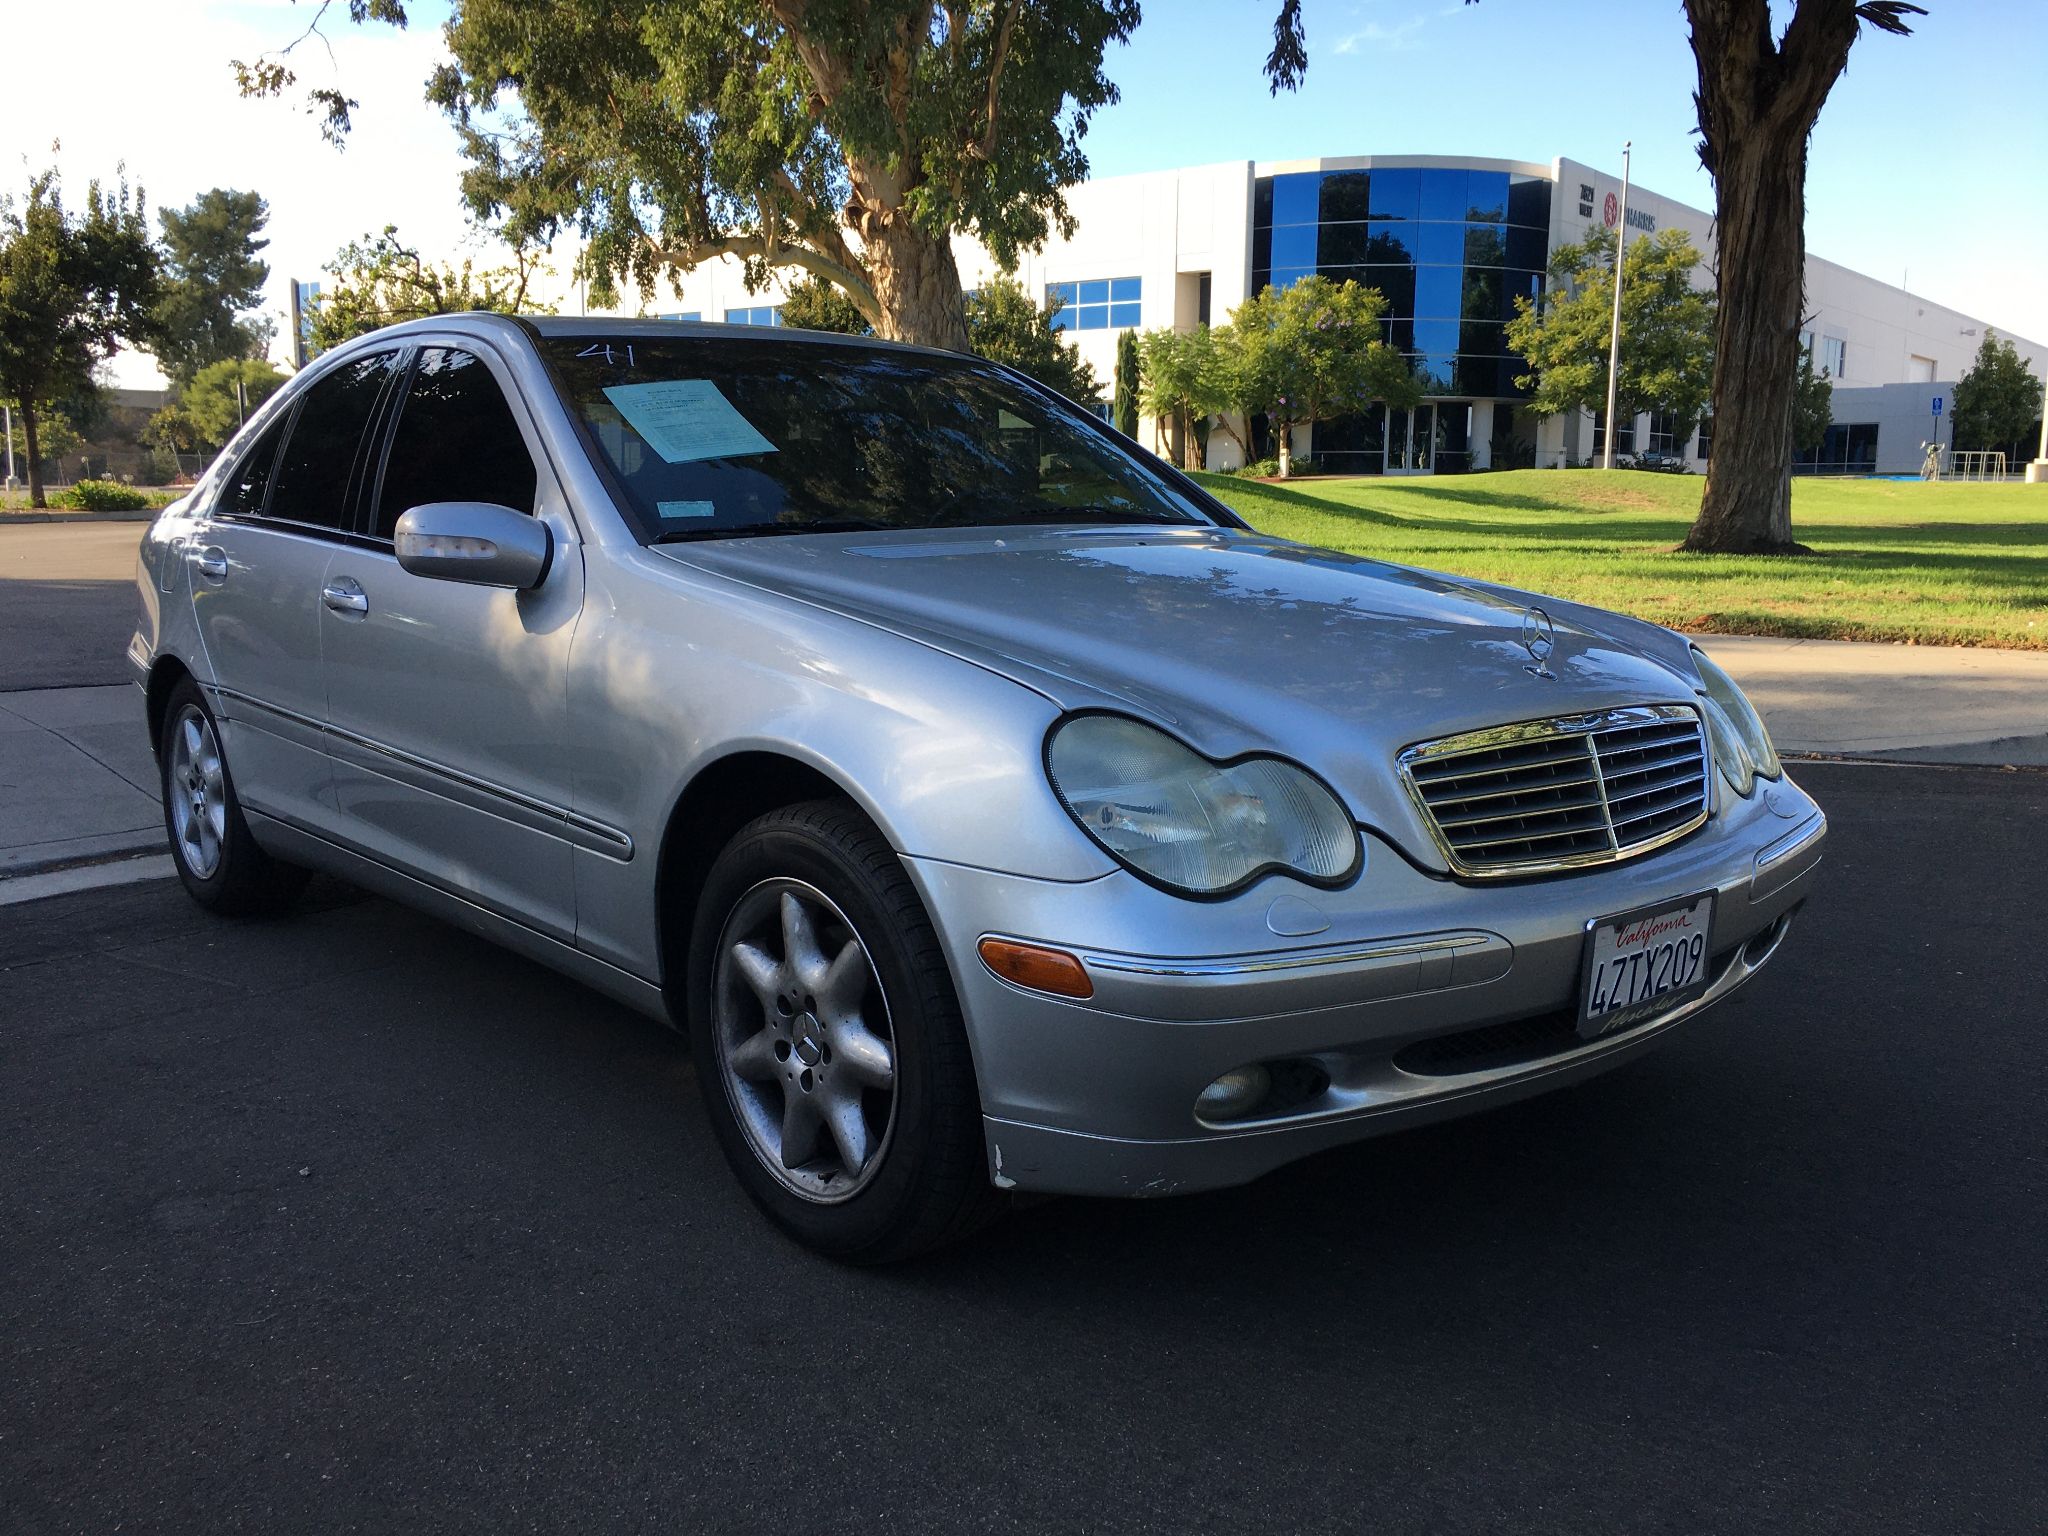 Used 2002 MercedesBenz CClass C240 at City Cars